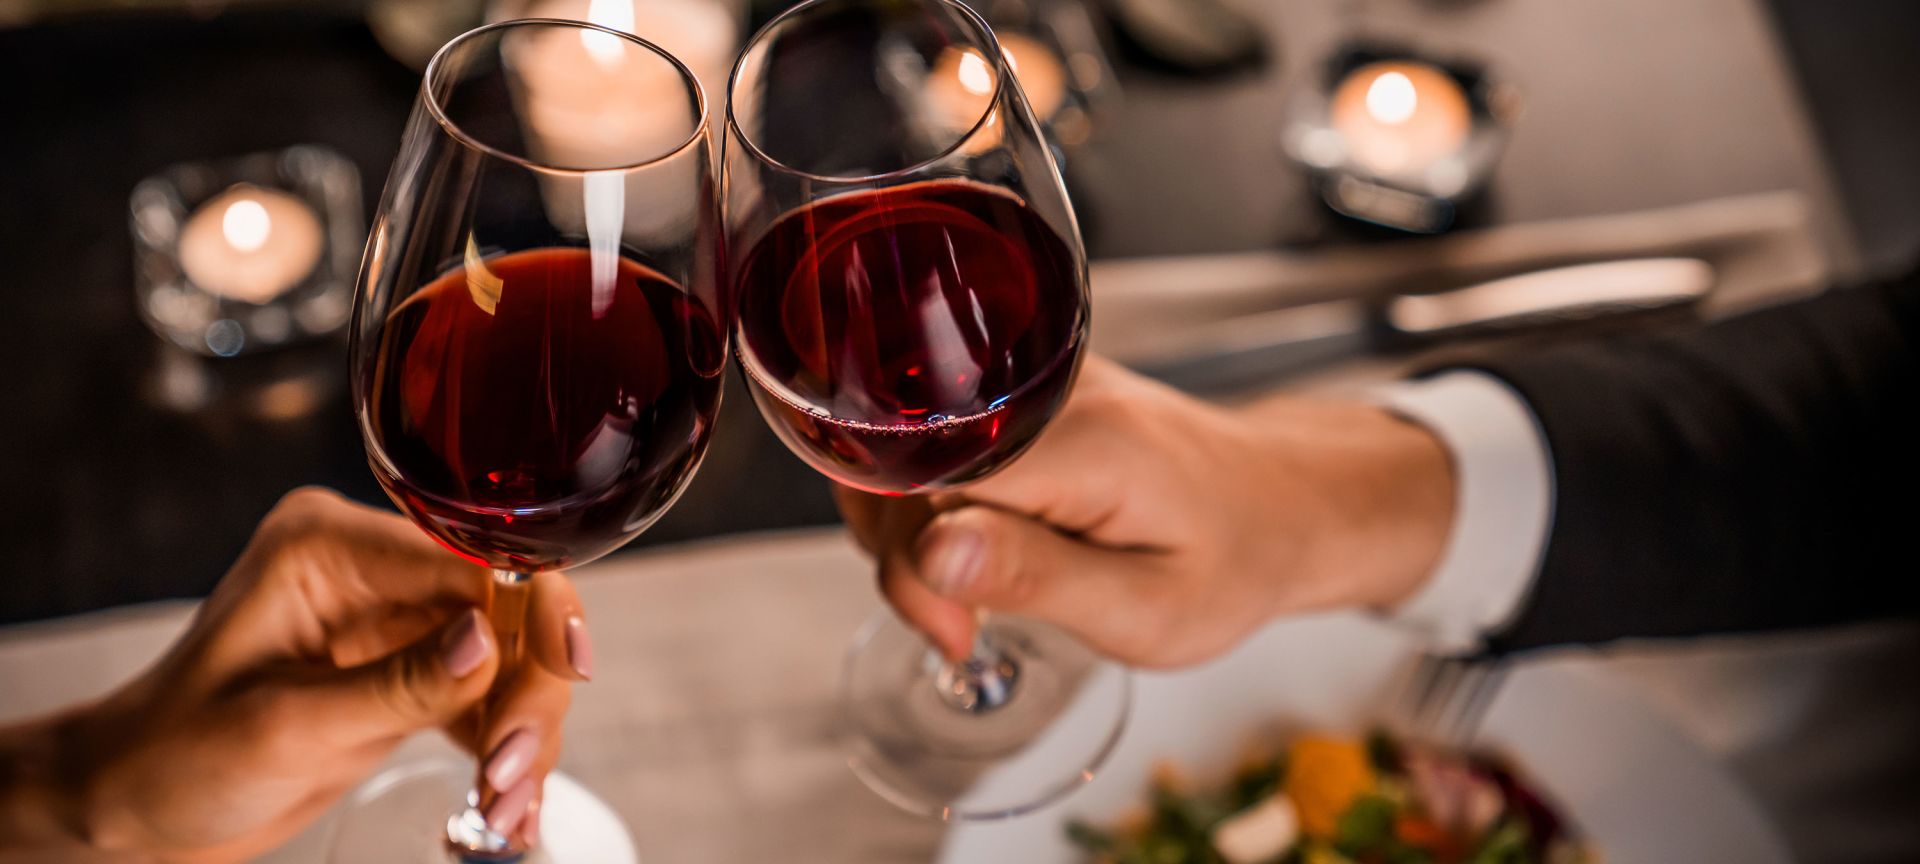 Couple At Dinner With Glasses of Wine